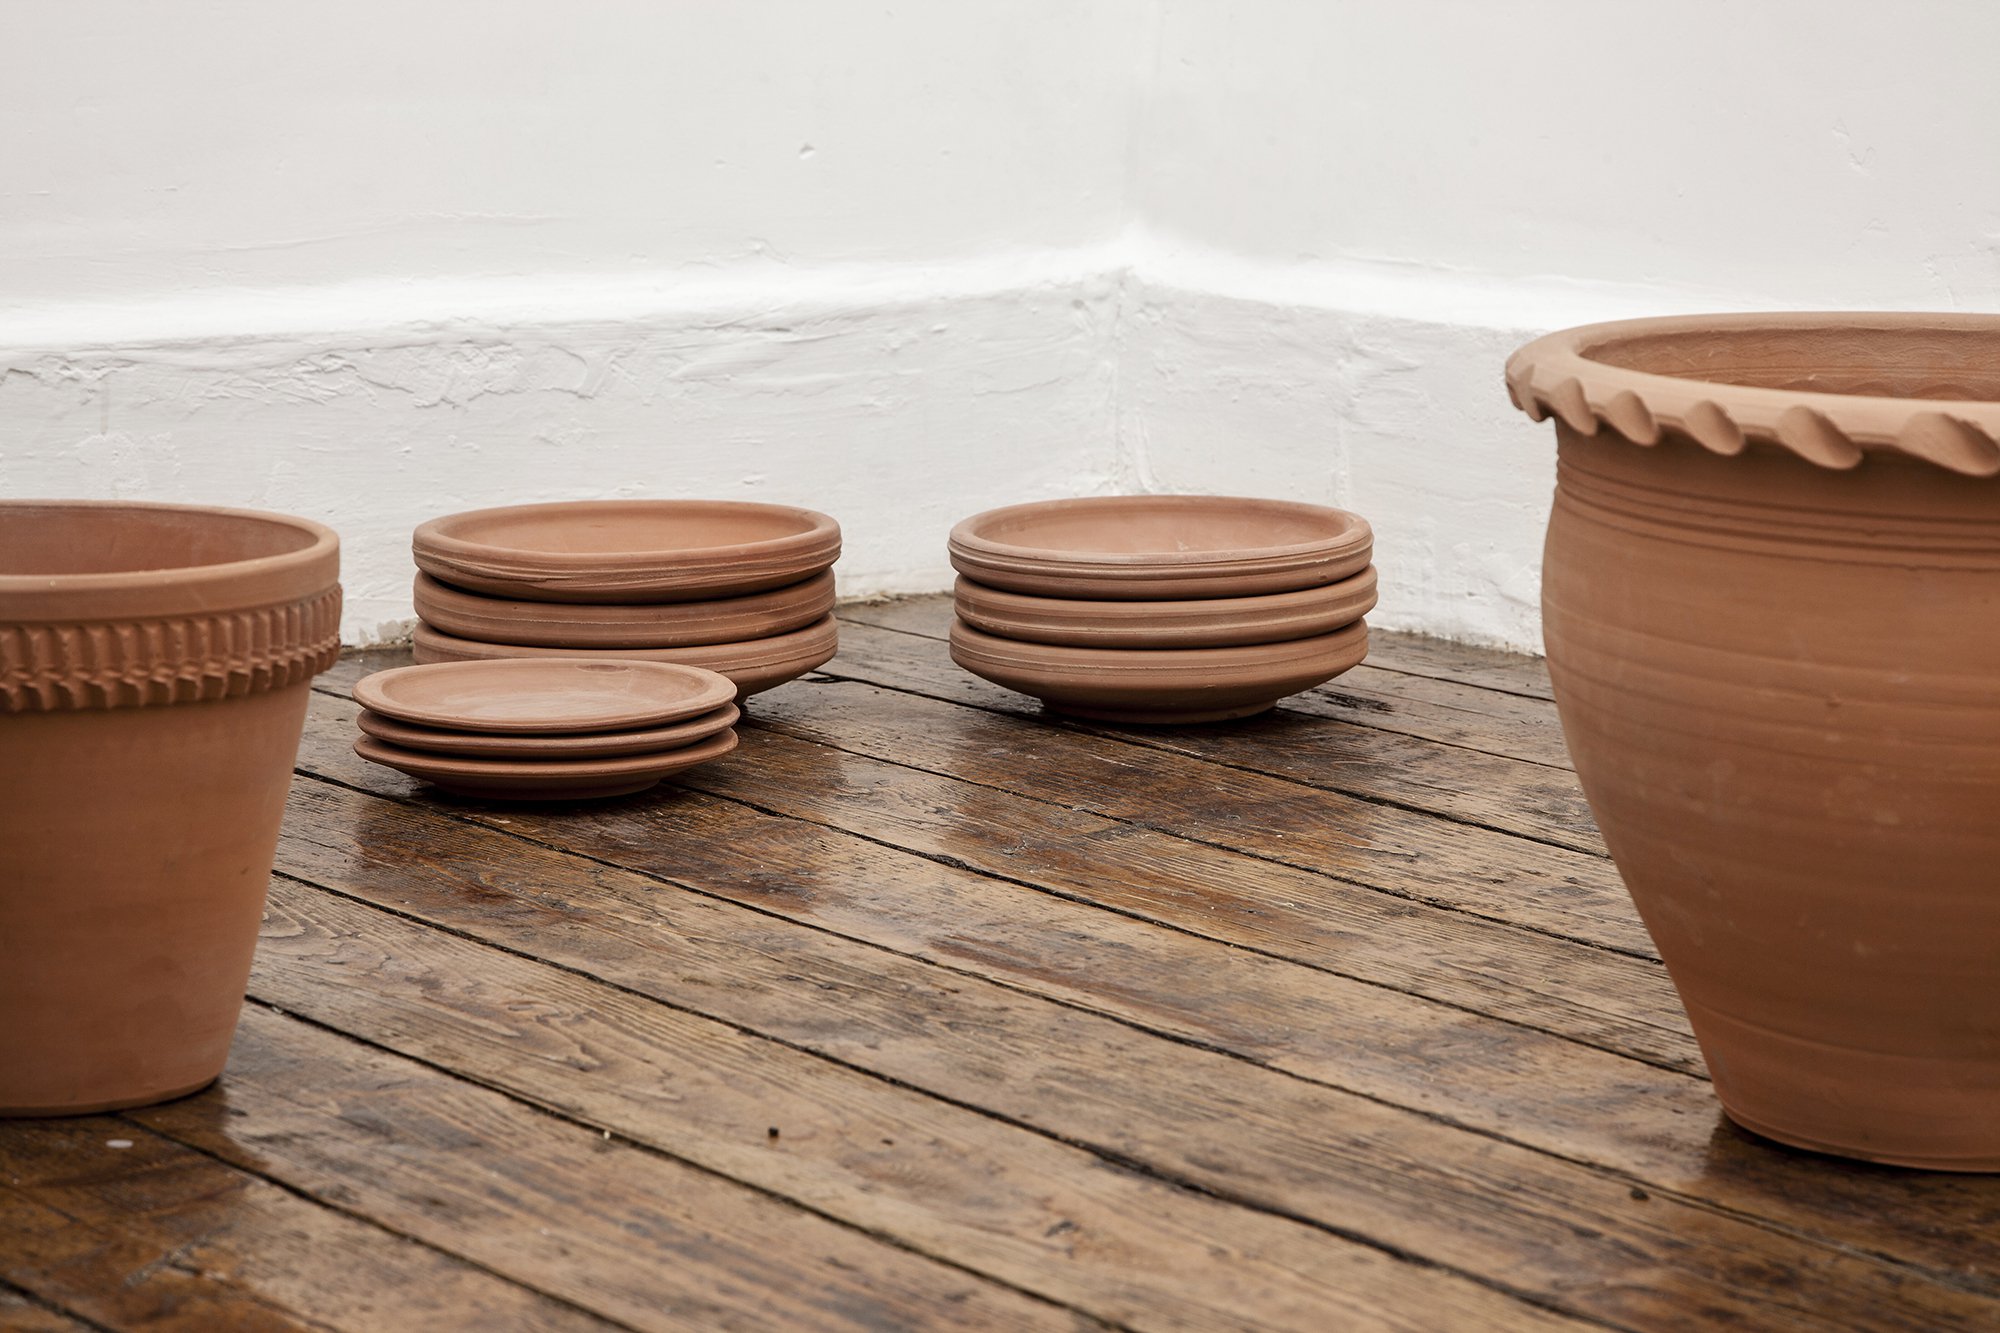 Christodoulos Panayiotou, Untitled, 9 ceramic pots and 9 ceramic plates, dimensions variable, 2012. Installation view, Tenuto, Rodeo, Istanbul, 2012 – 2013